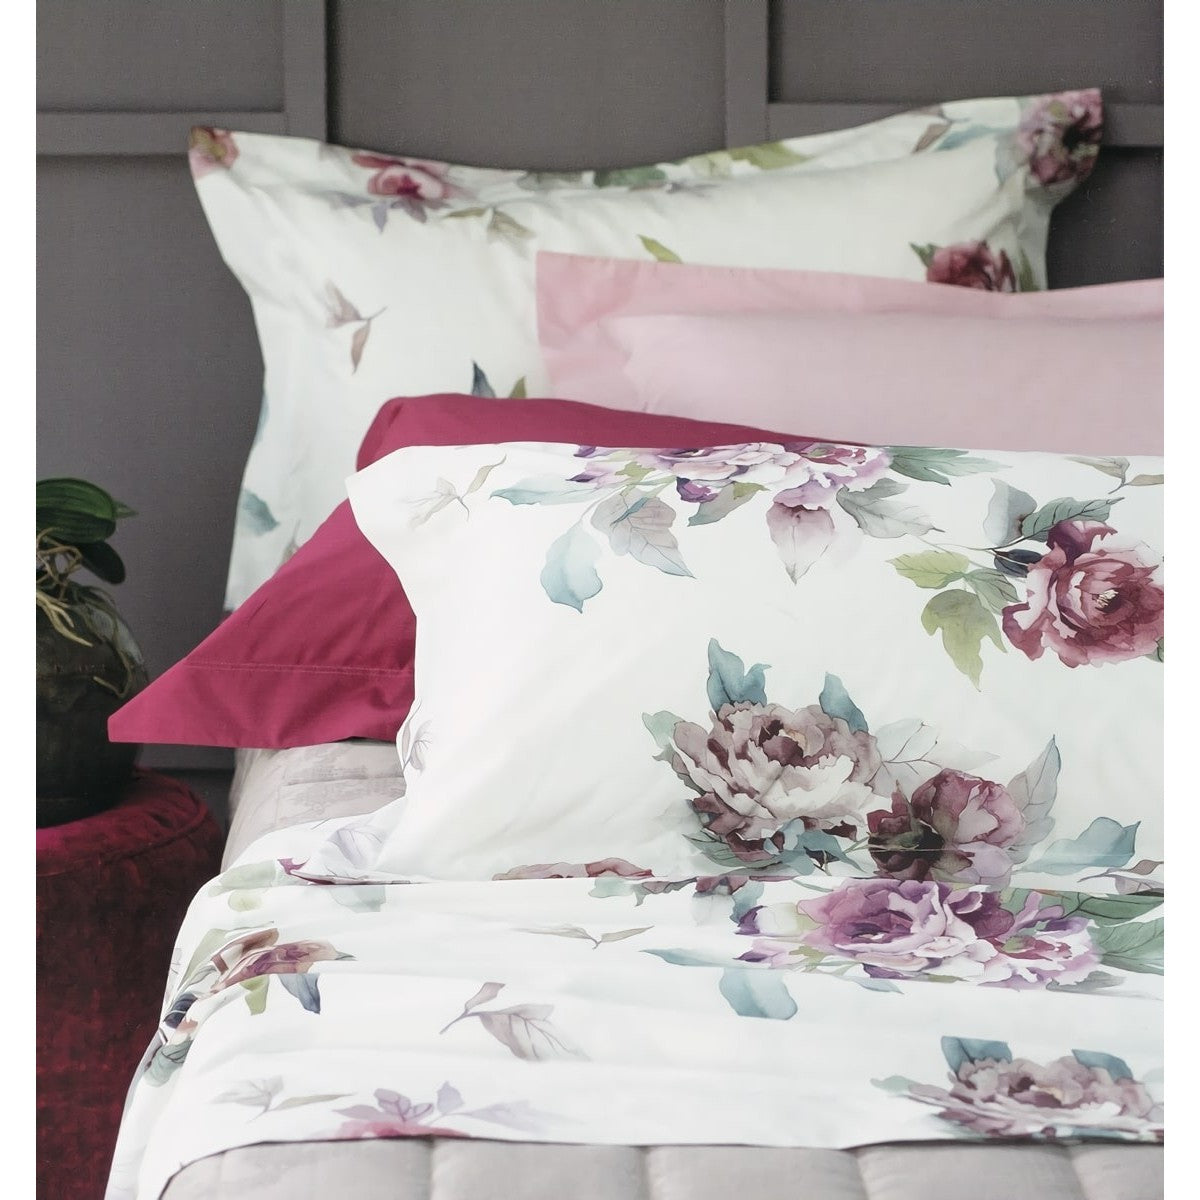 Double bedding set with duvet cover Hillary